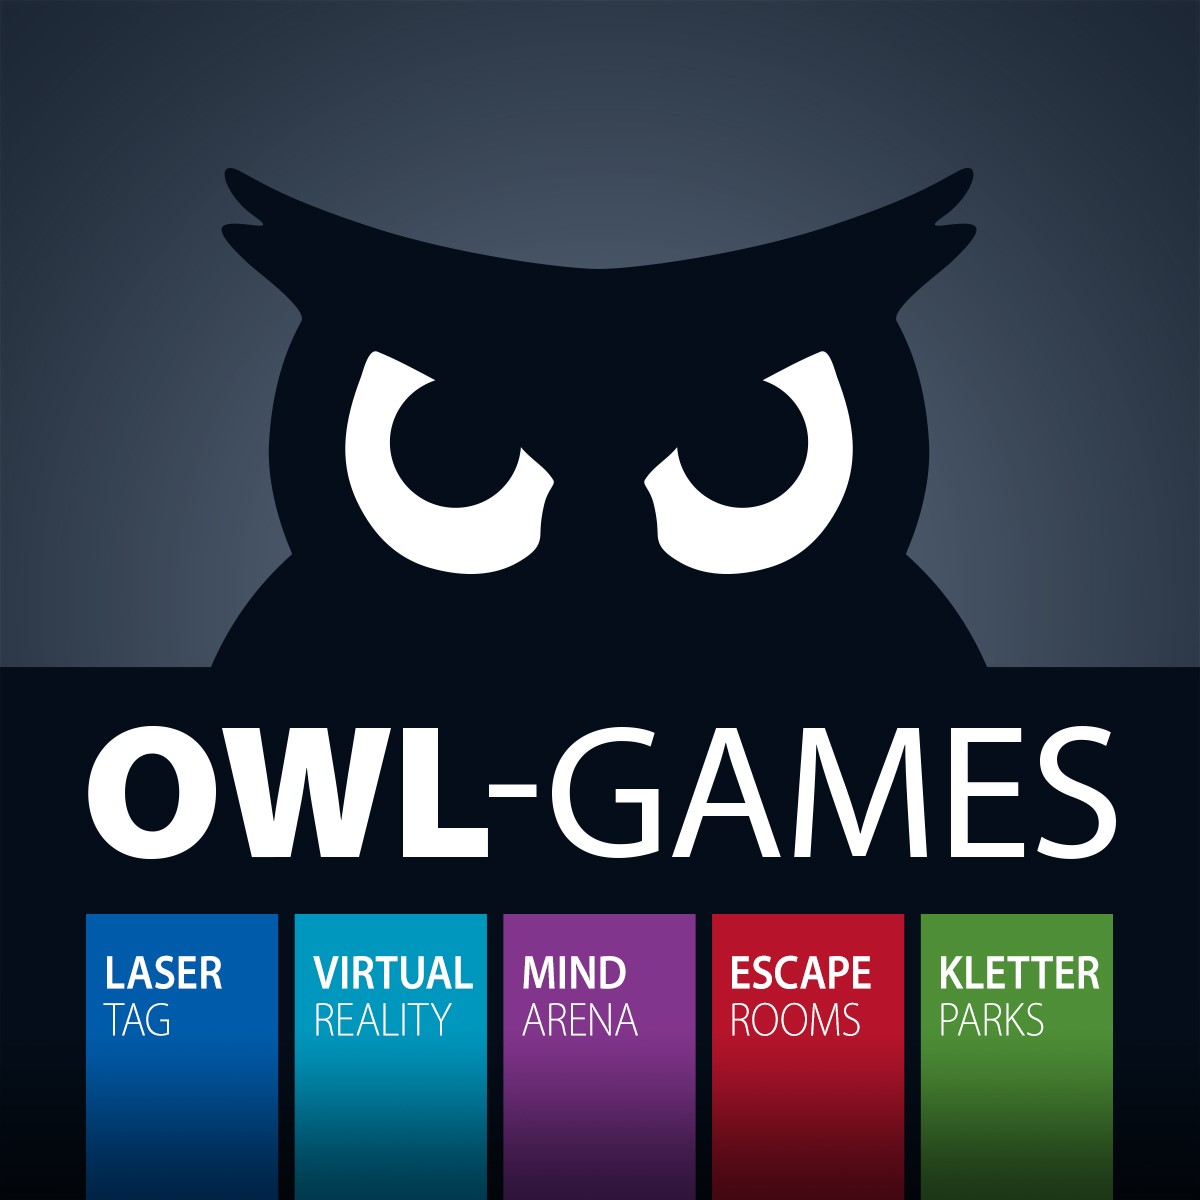 Bild 1 OWL-GAMES by Sieger-Event GmbH in Paderborn